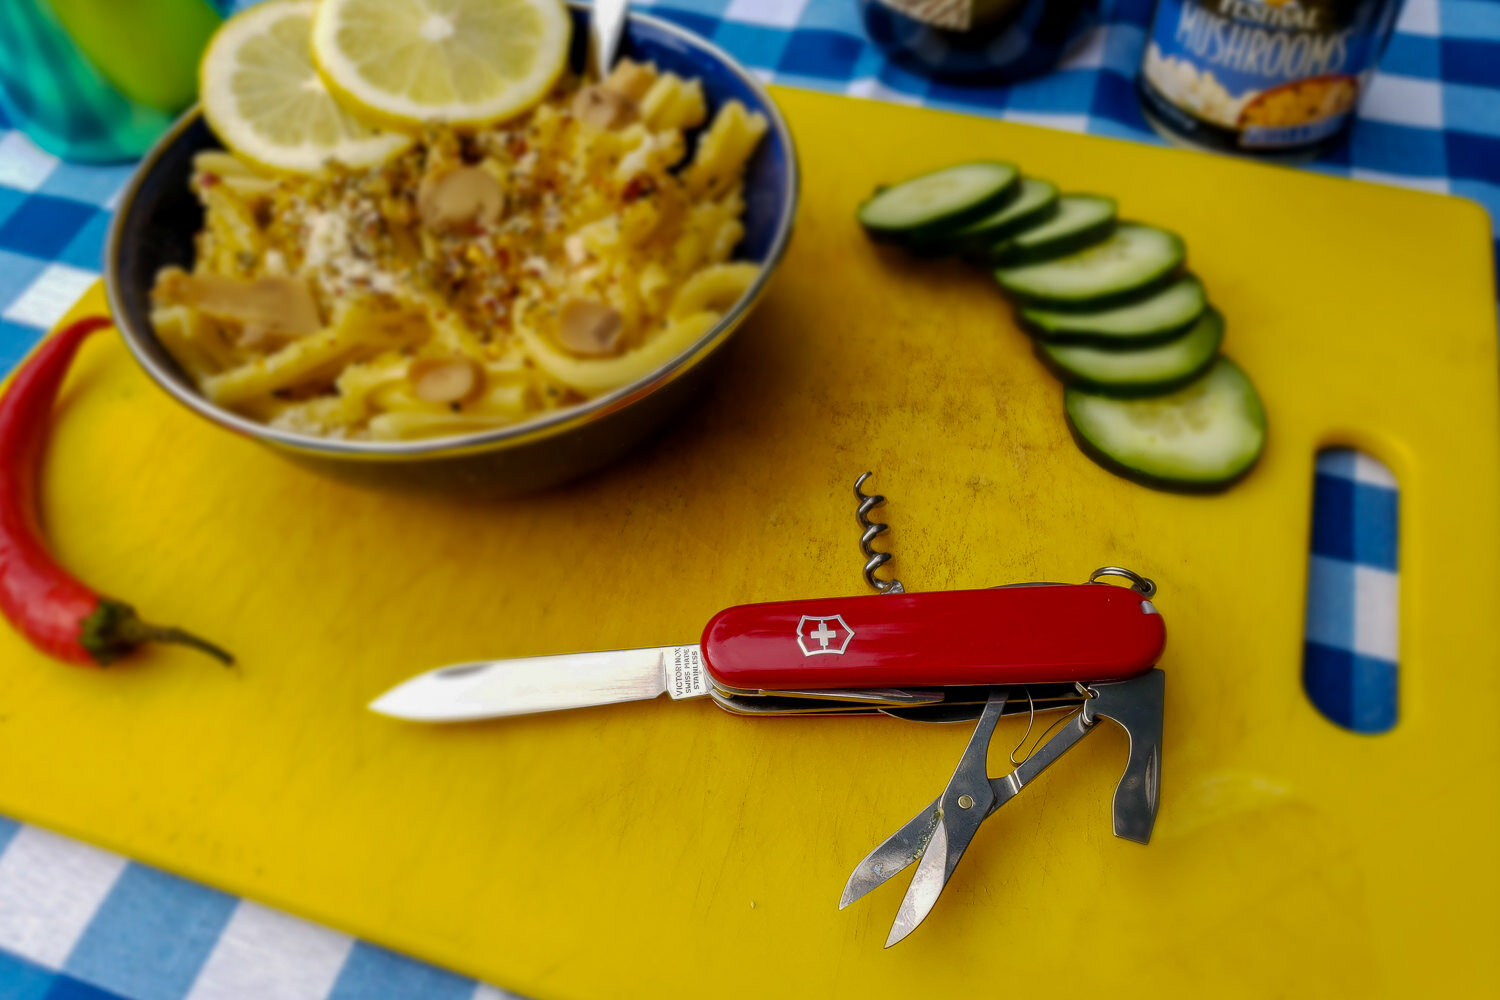 The Victorinox Swiss Army Huntsman has a ton of tools and is an excellent value for the money.